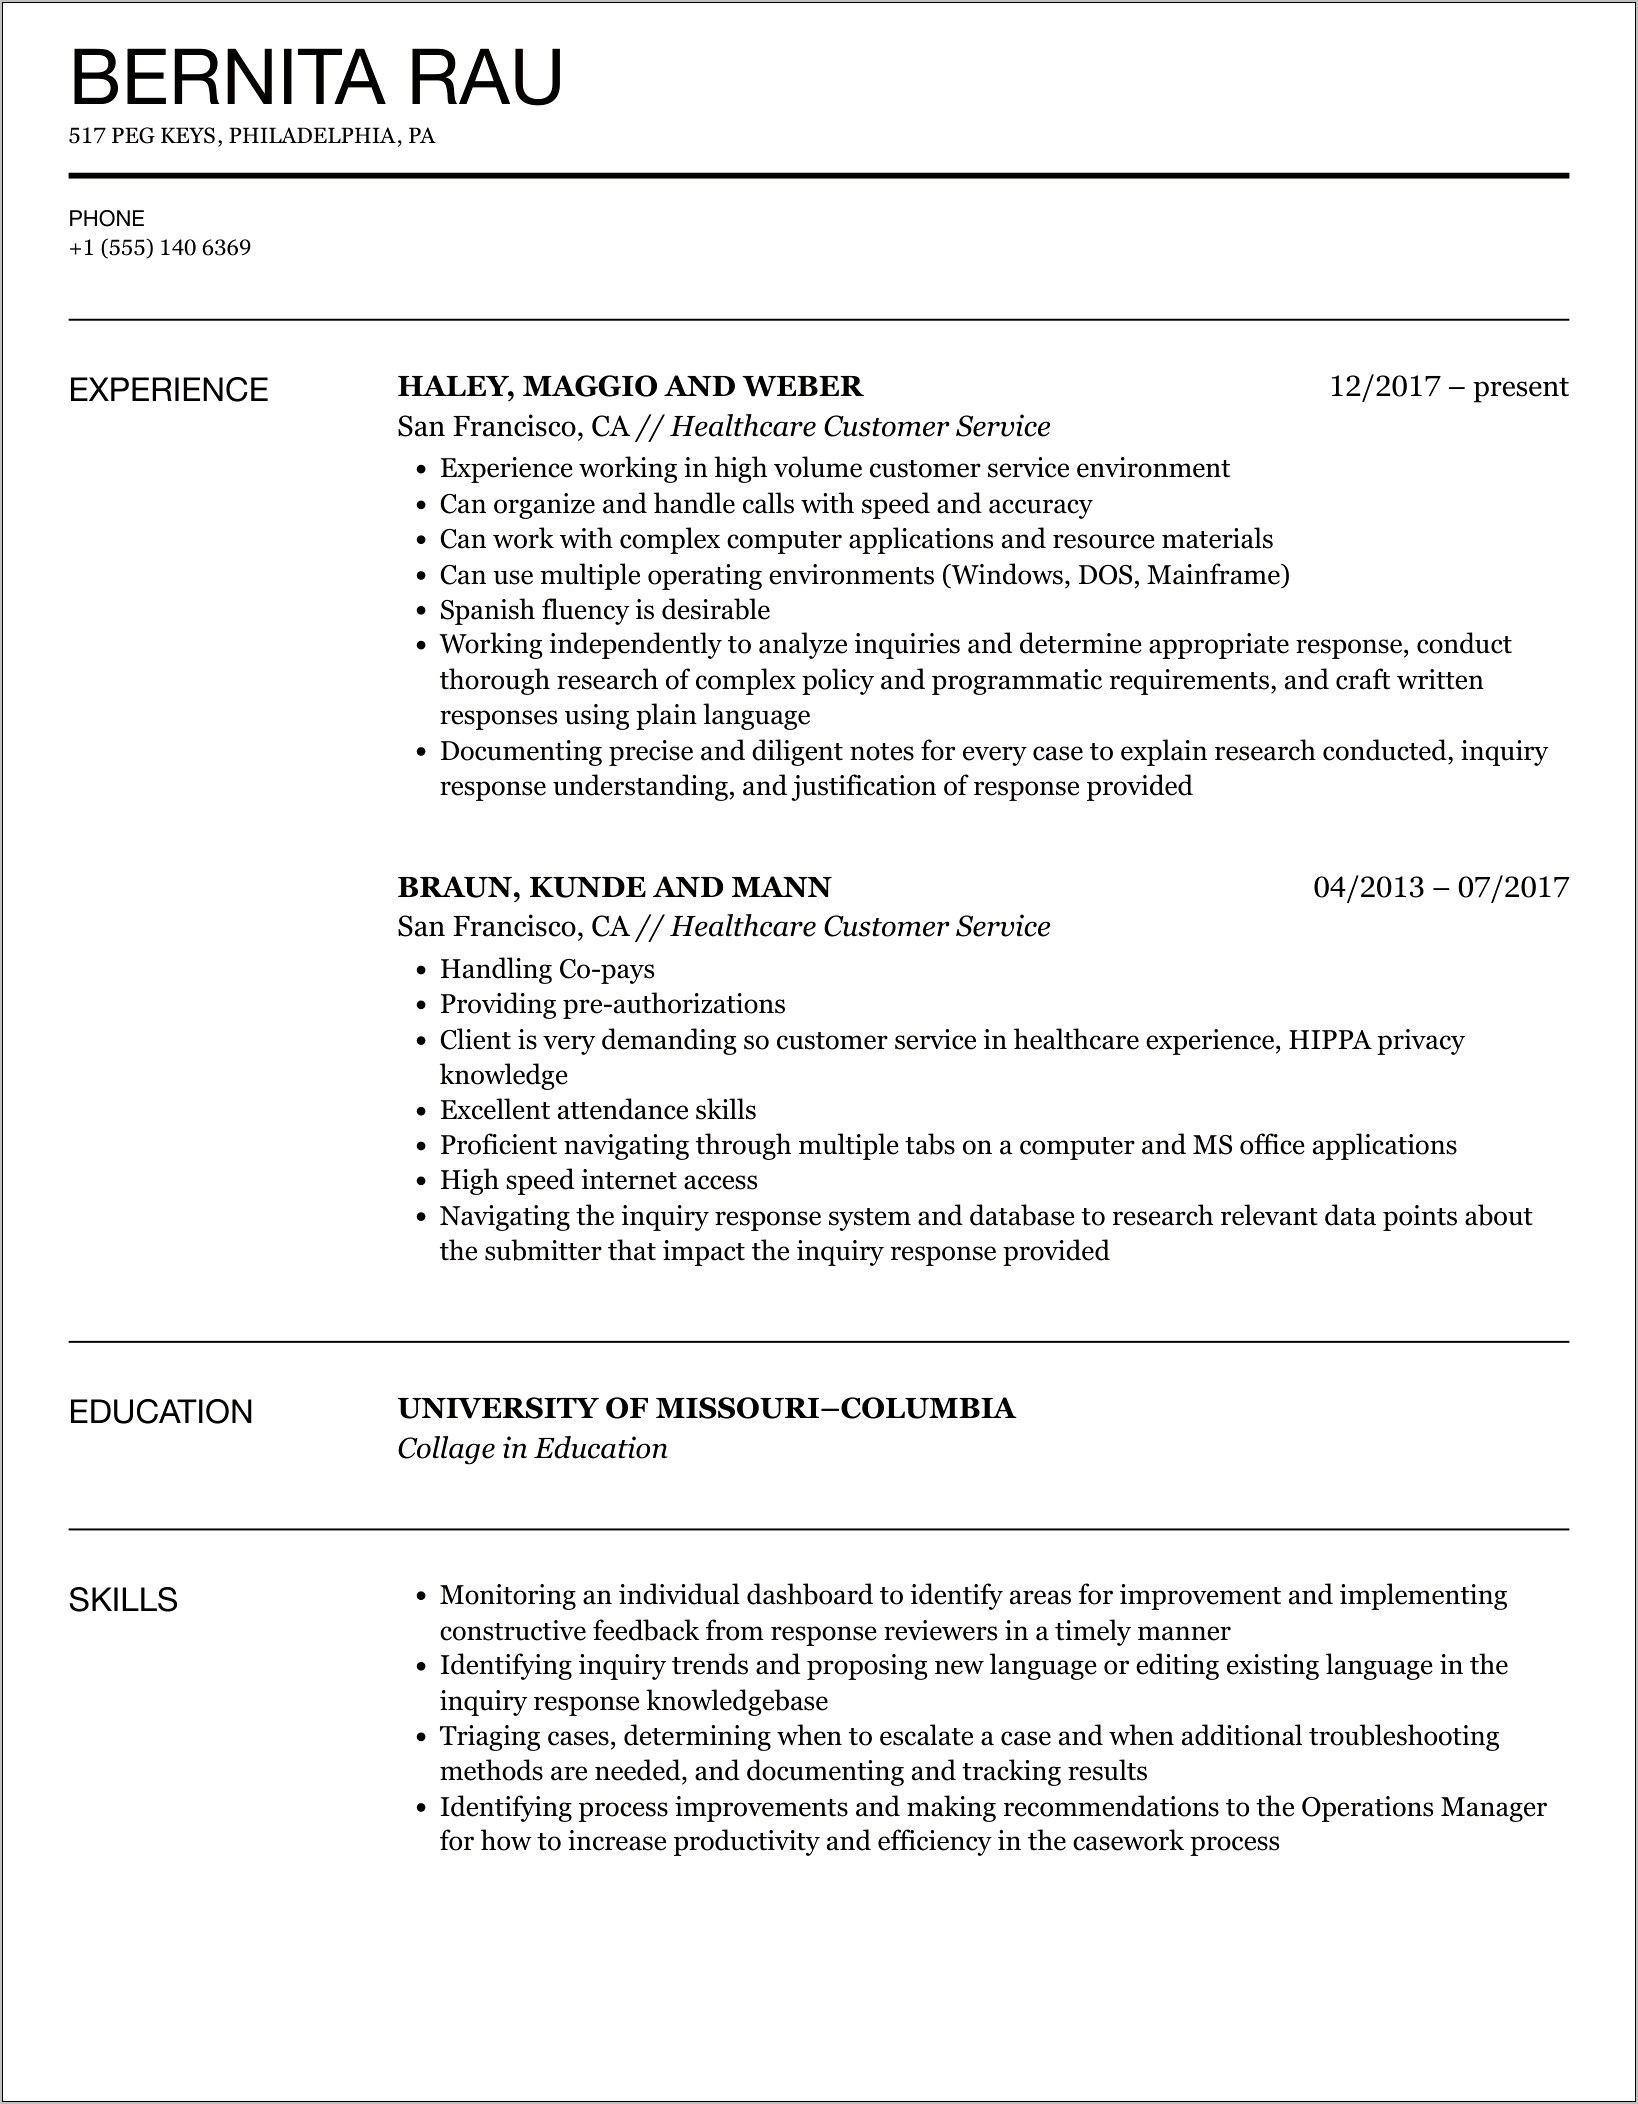 Resume Objective Examples For Healthcare